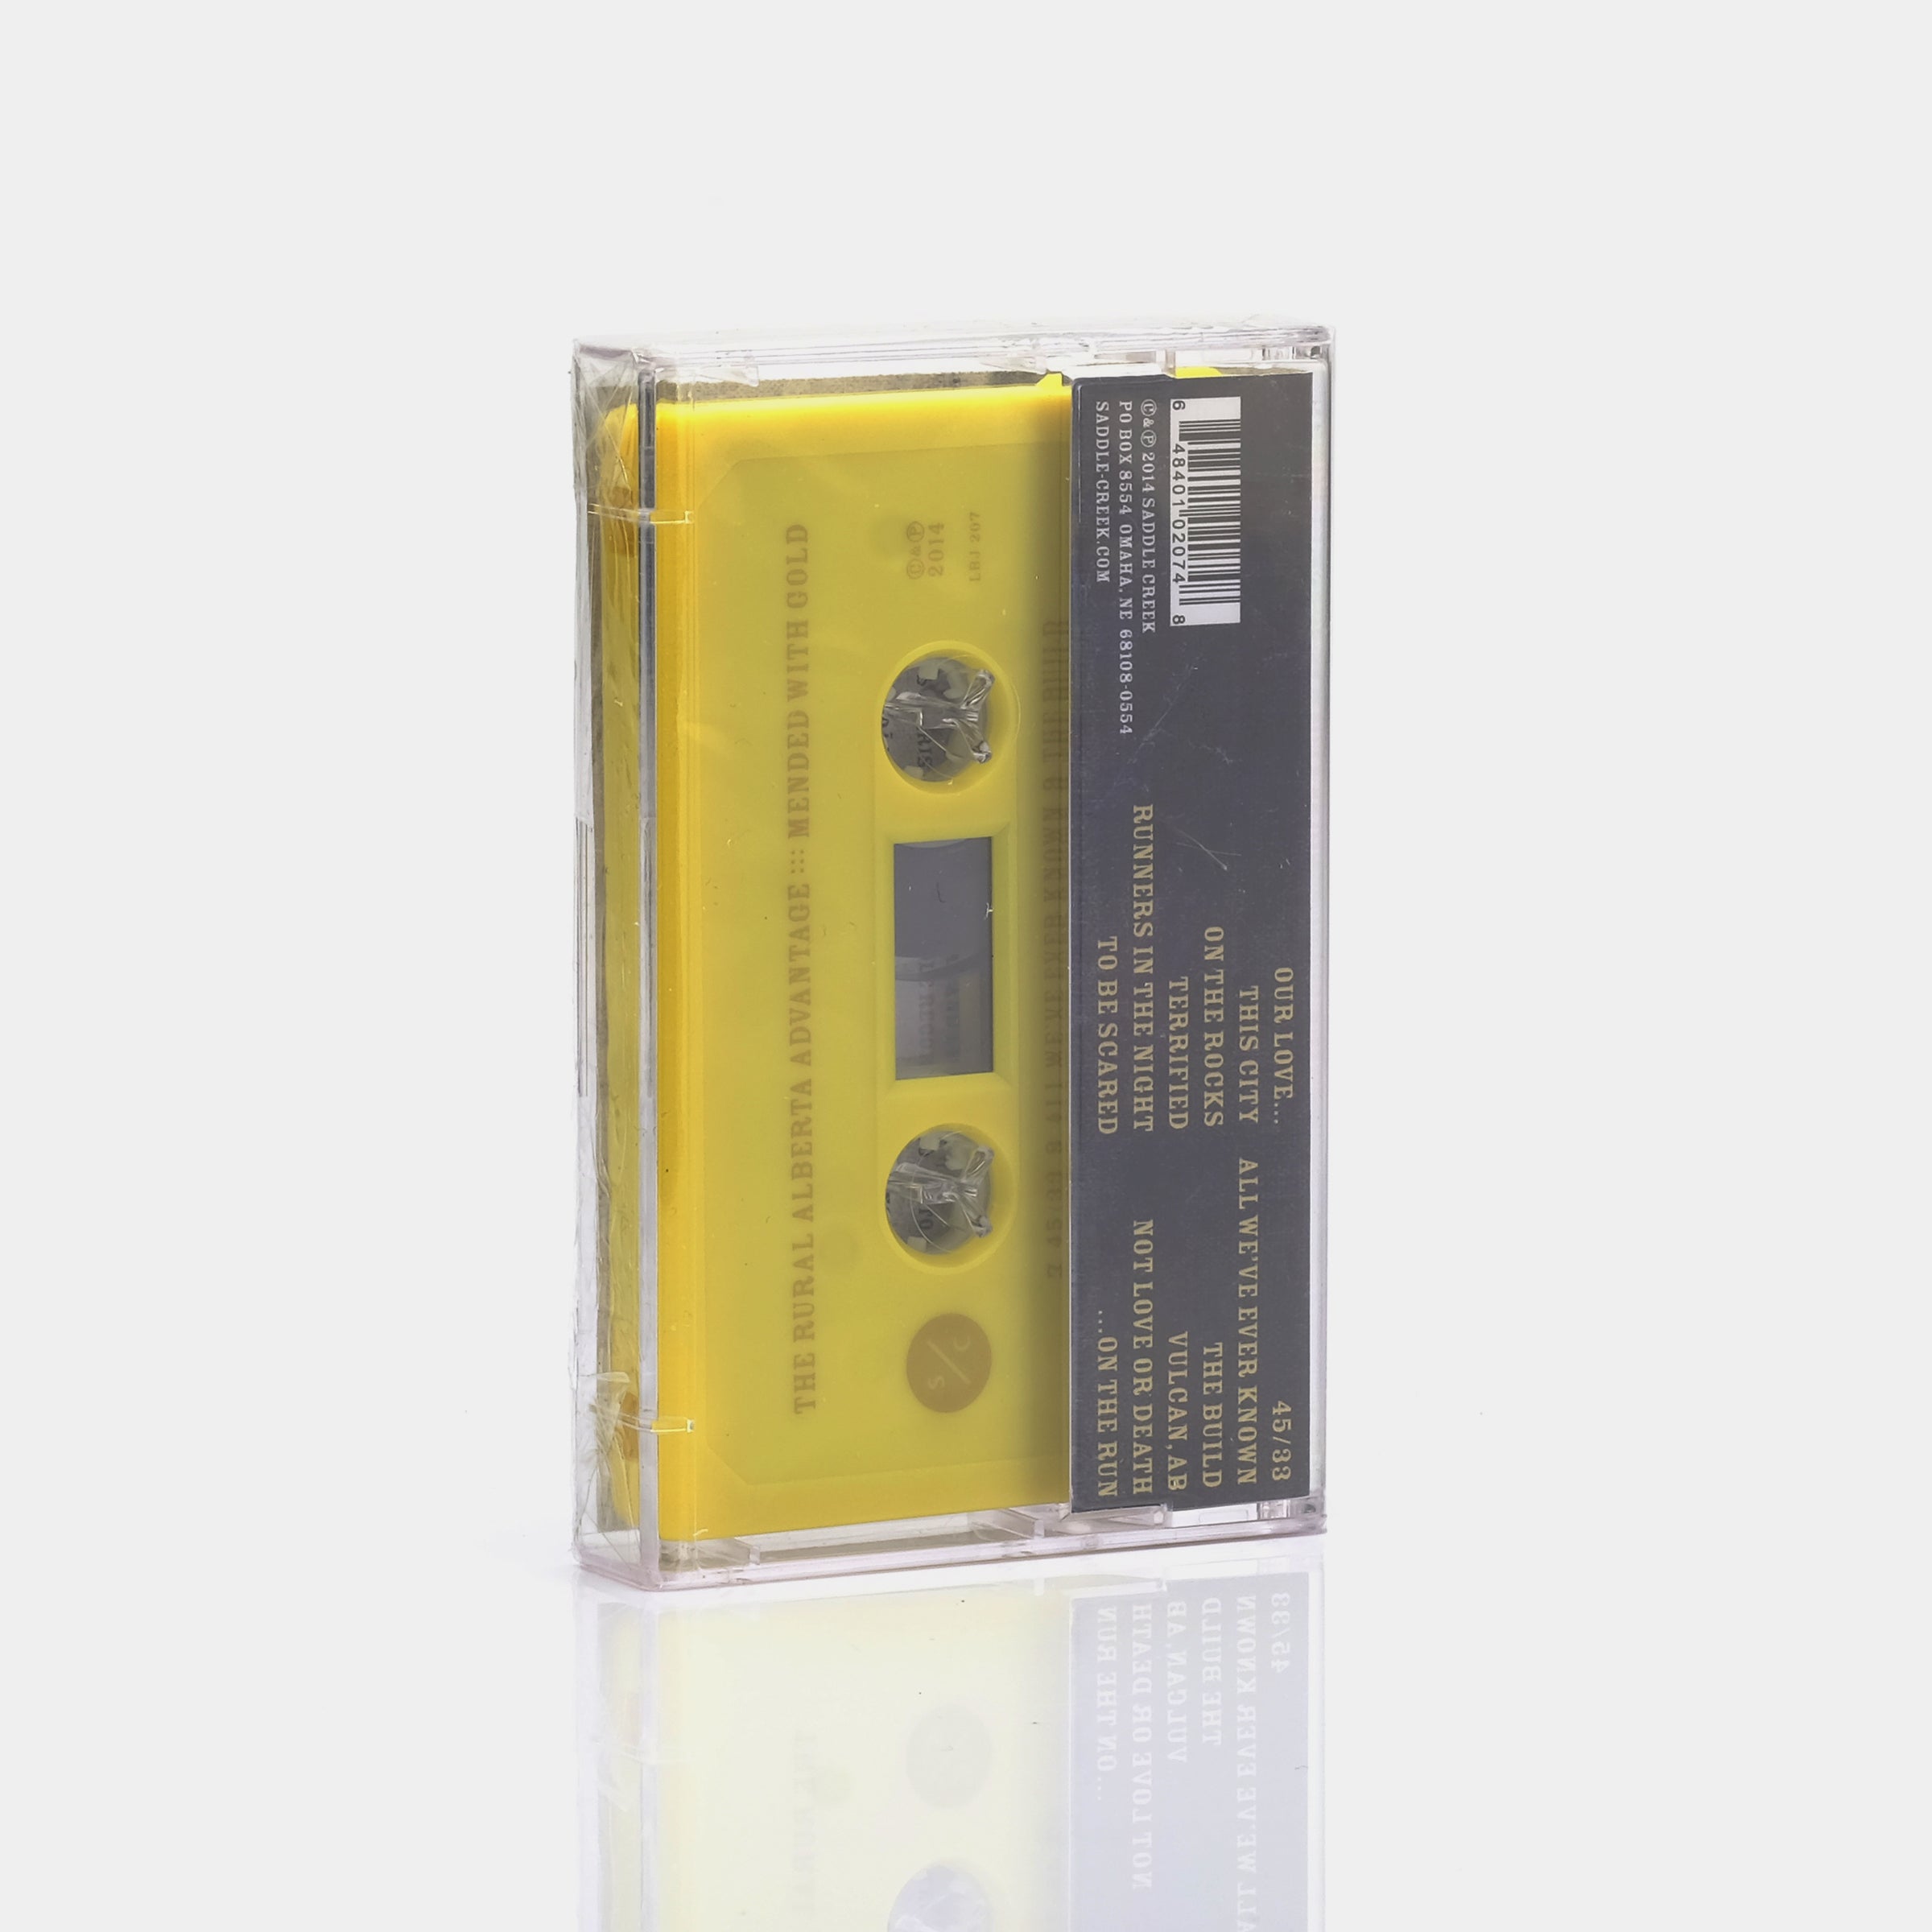 The Rural Alberta Advantage - Mended With Gold Cassette Tape